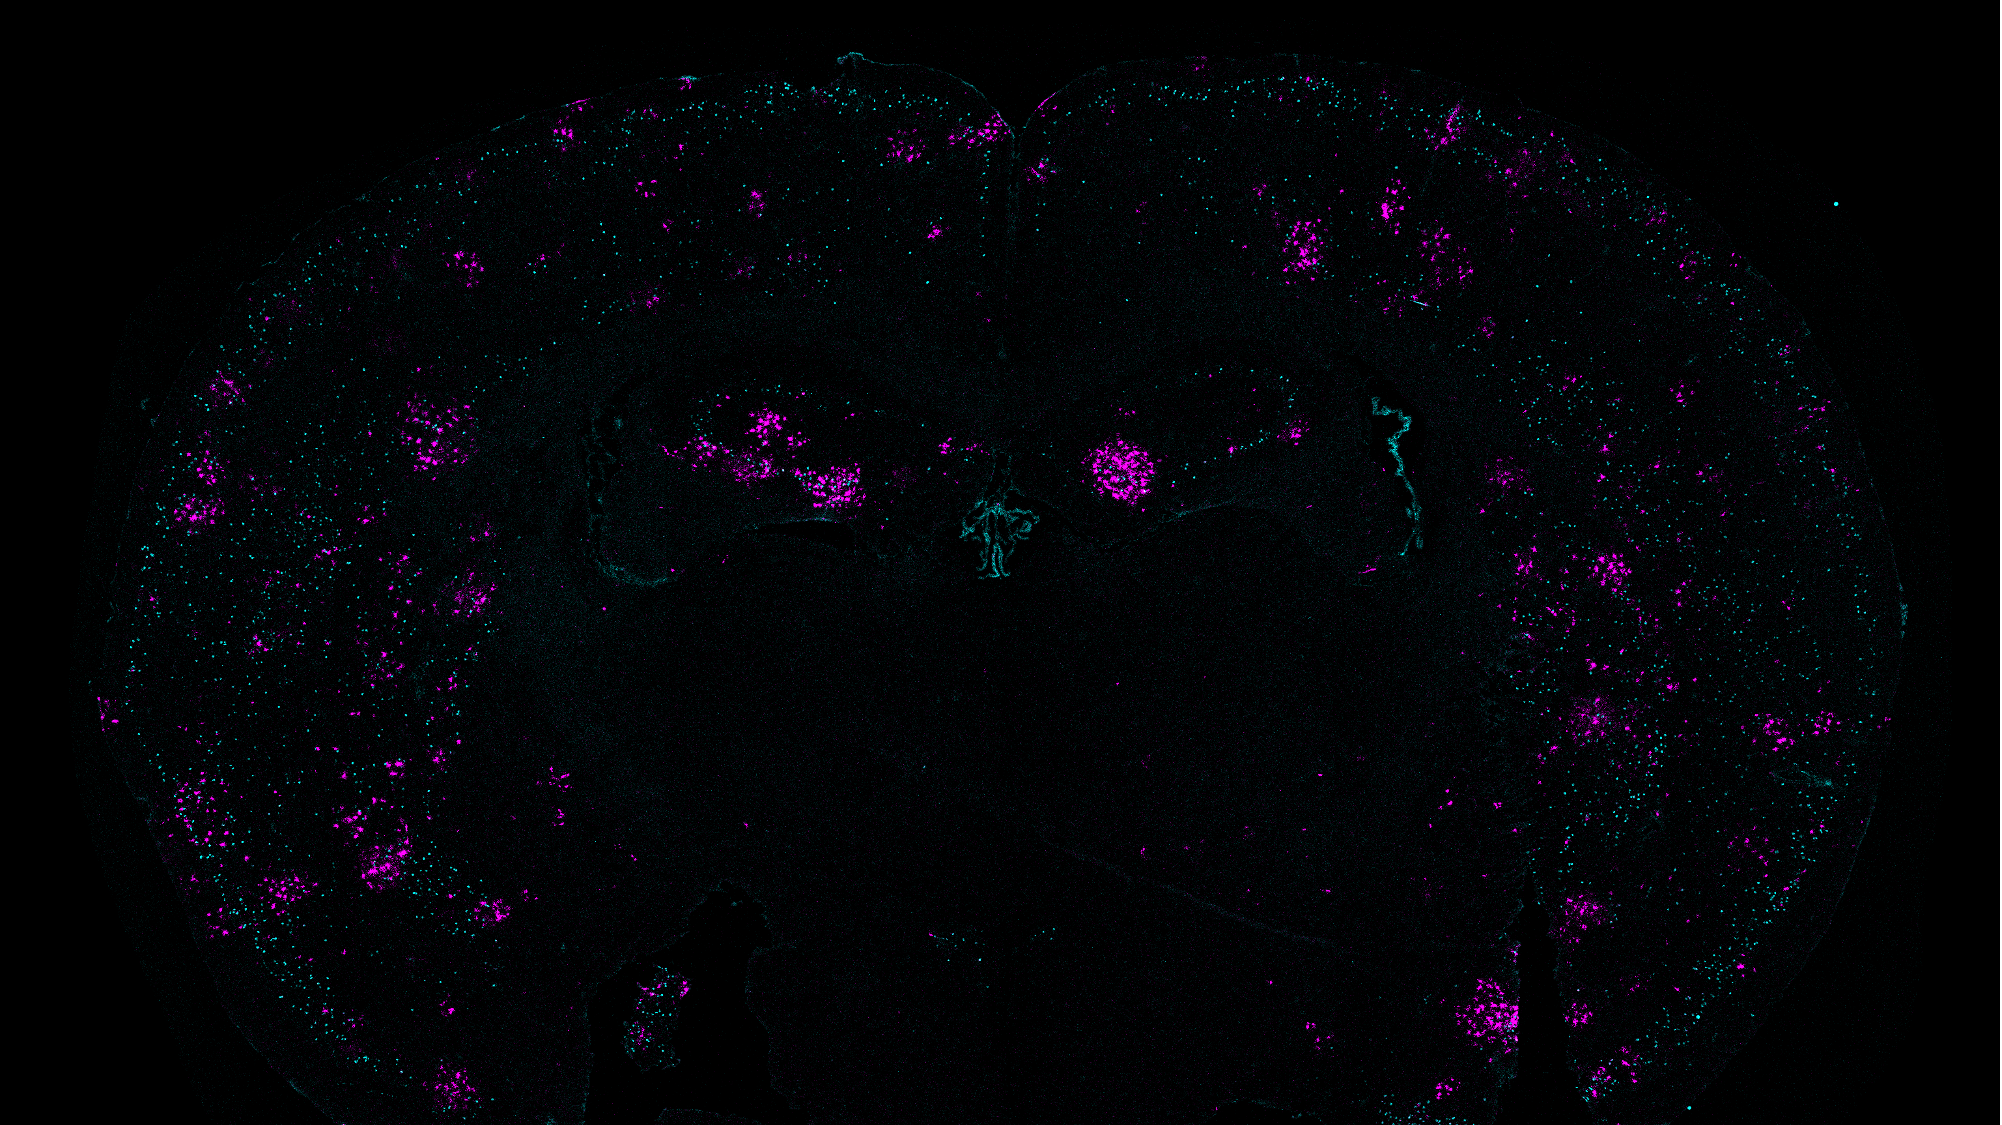 On a black background in the curvy M-like shape of a mouse brain cross section, many patches of tiny teal and purple dots appear